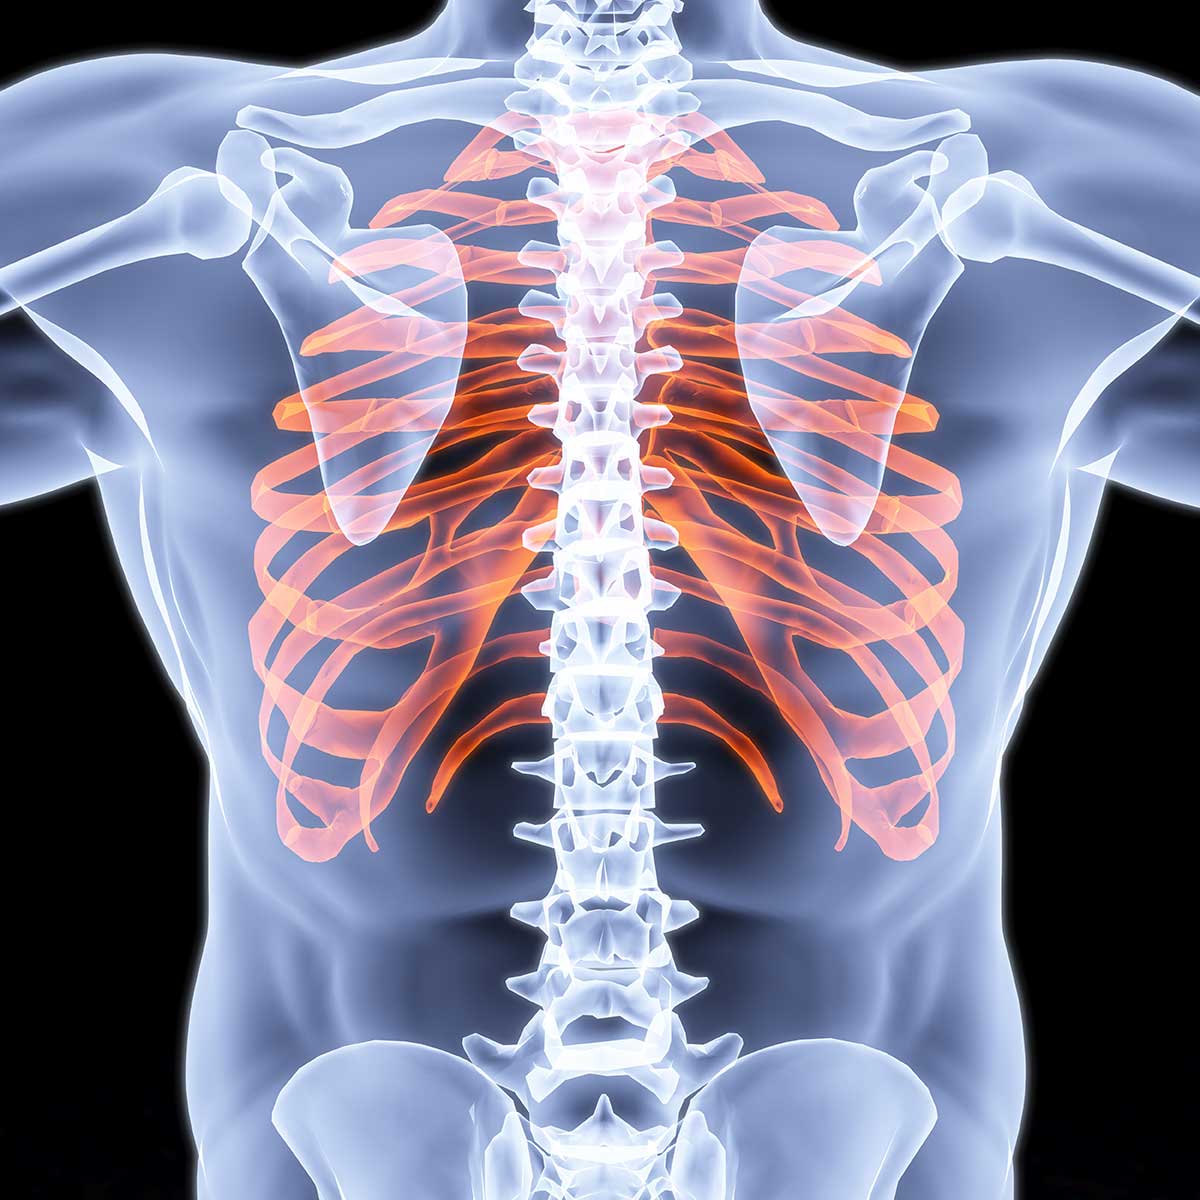 thoracic cage